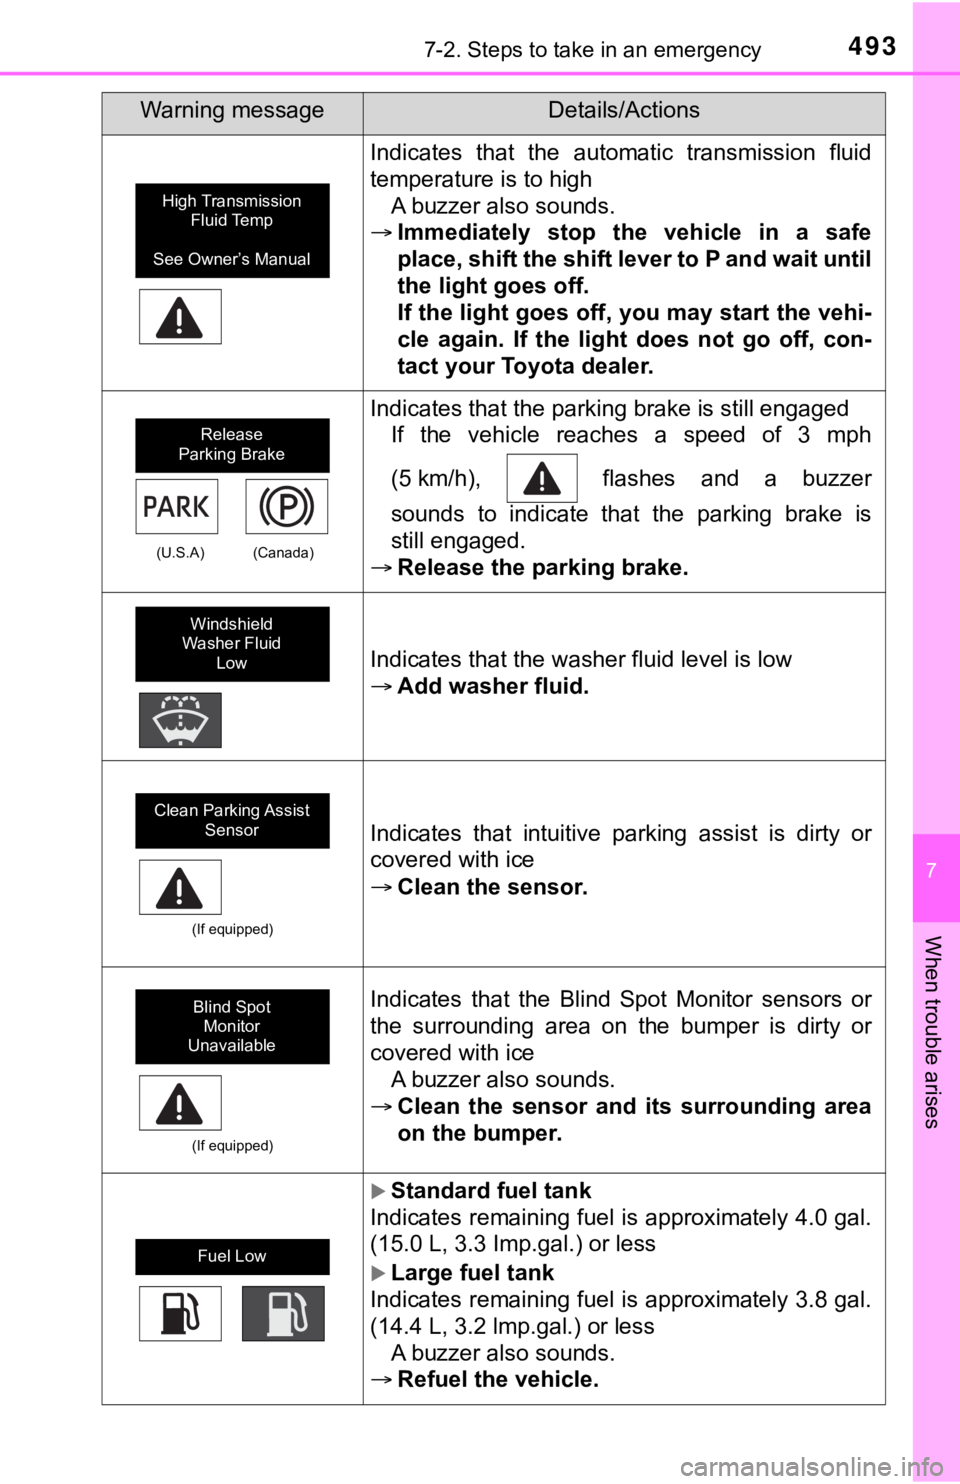 TOYOTA TUNDRA 2020  Owners Manual (in English) 4937-2. Steps to take in an emergency
7
When trouble arises
Indicates  that  the  automatic  transmission  fluid
temperature is to highA buzzer also sounds.
 Immediately  stop  the  vehicle  in  a 